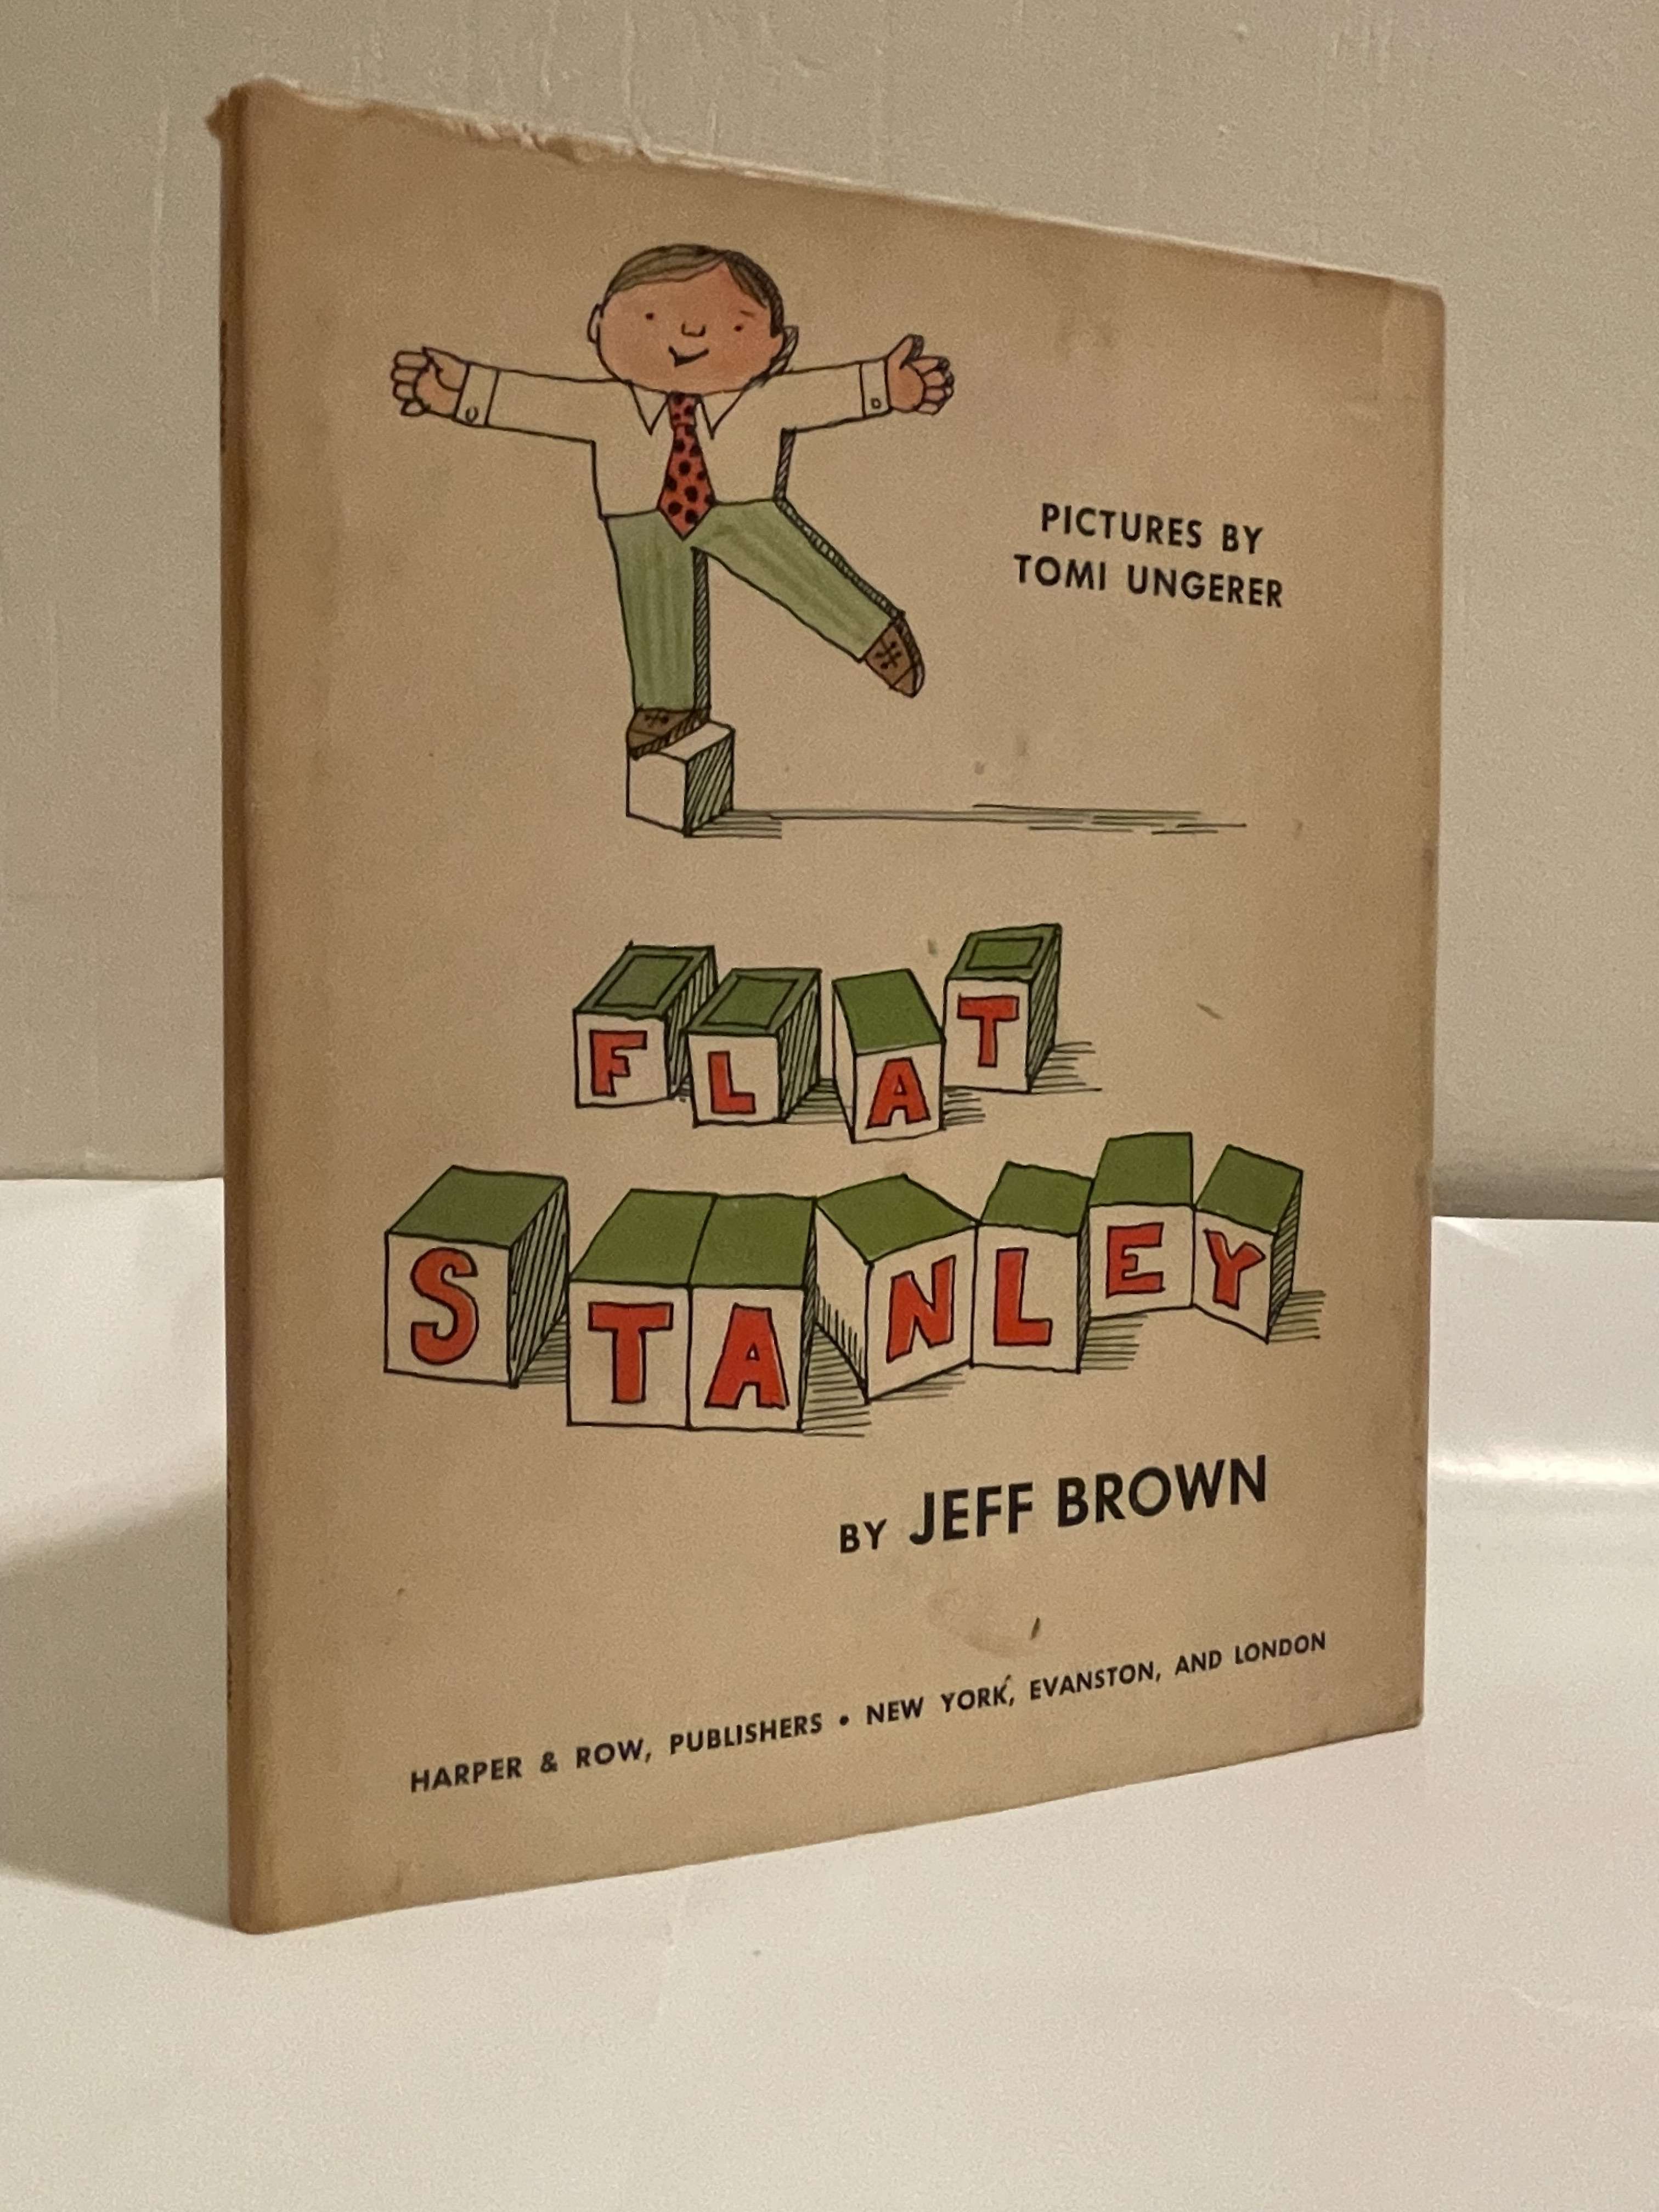 Flat Stanley - by Jeff Brown (Hardcover)